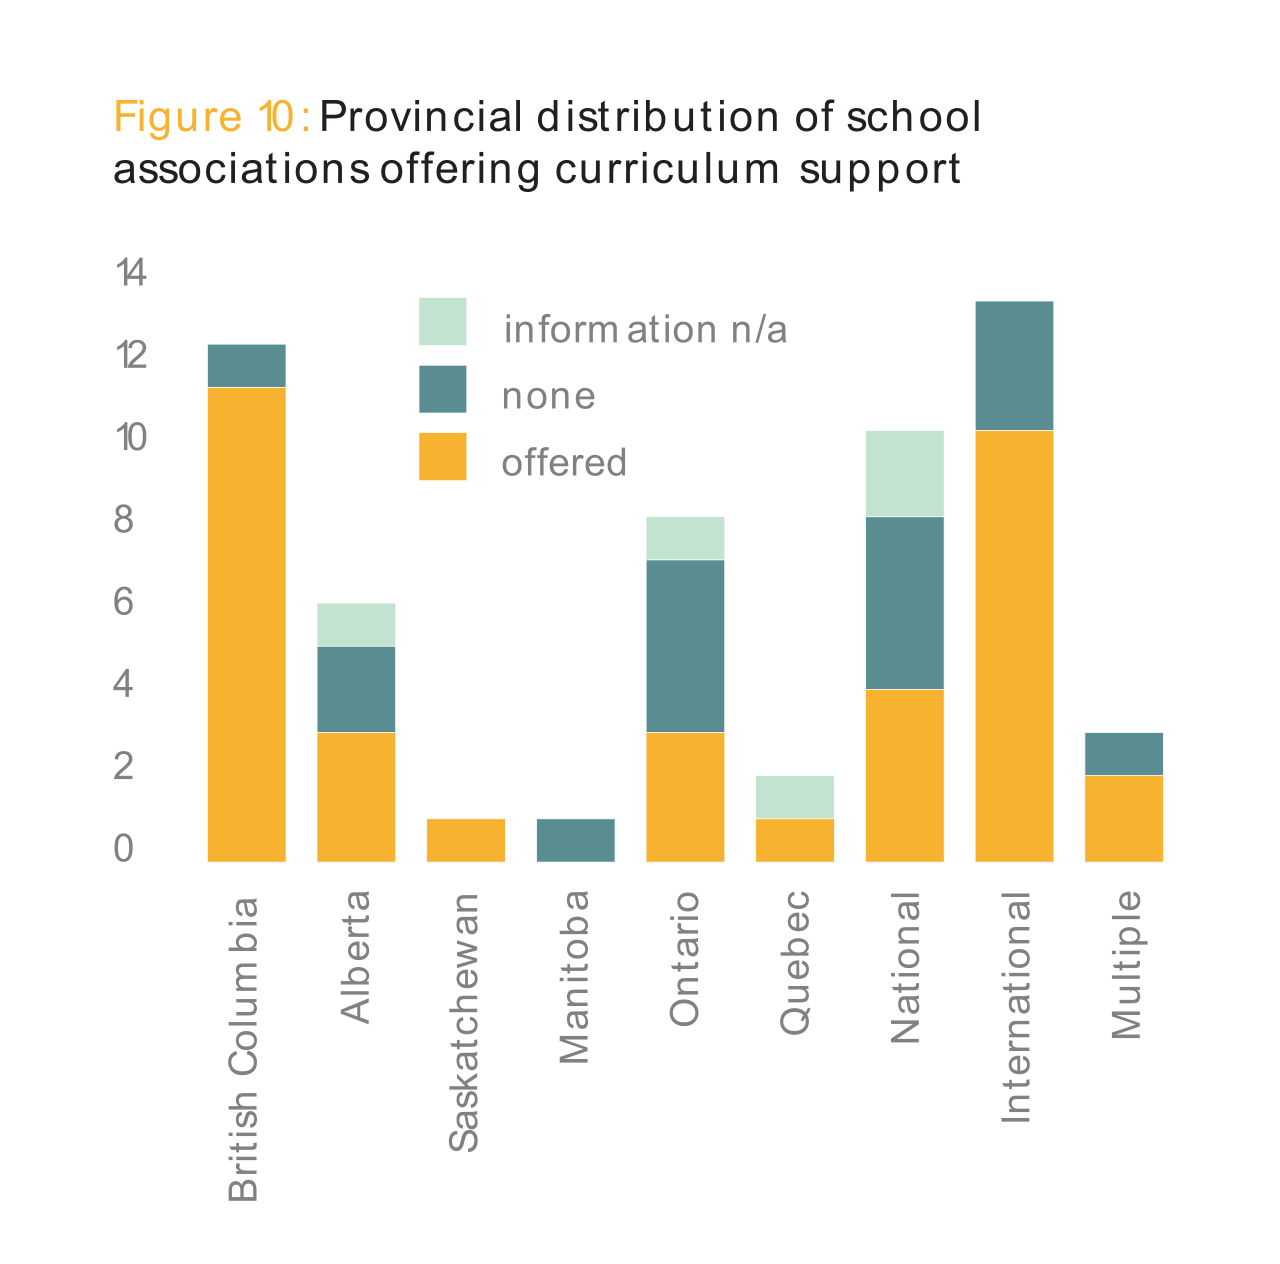 Figure 10: Provincial distribution of school associations offering curriculum support